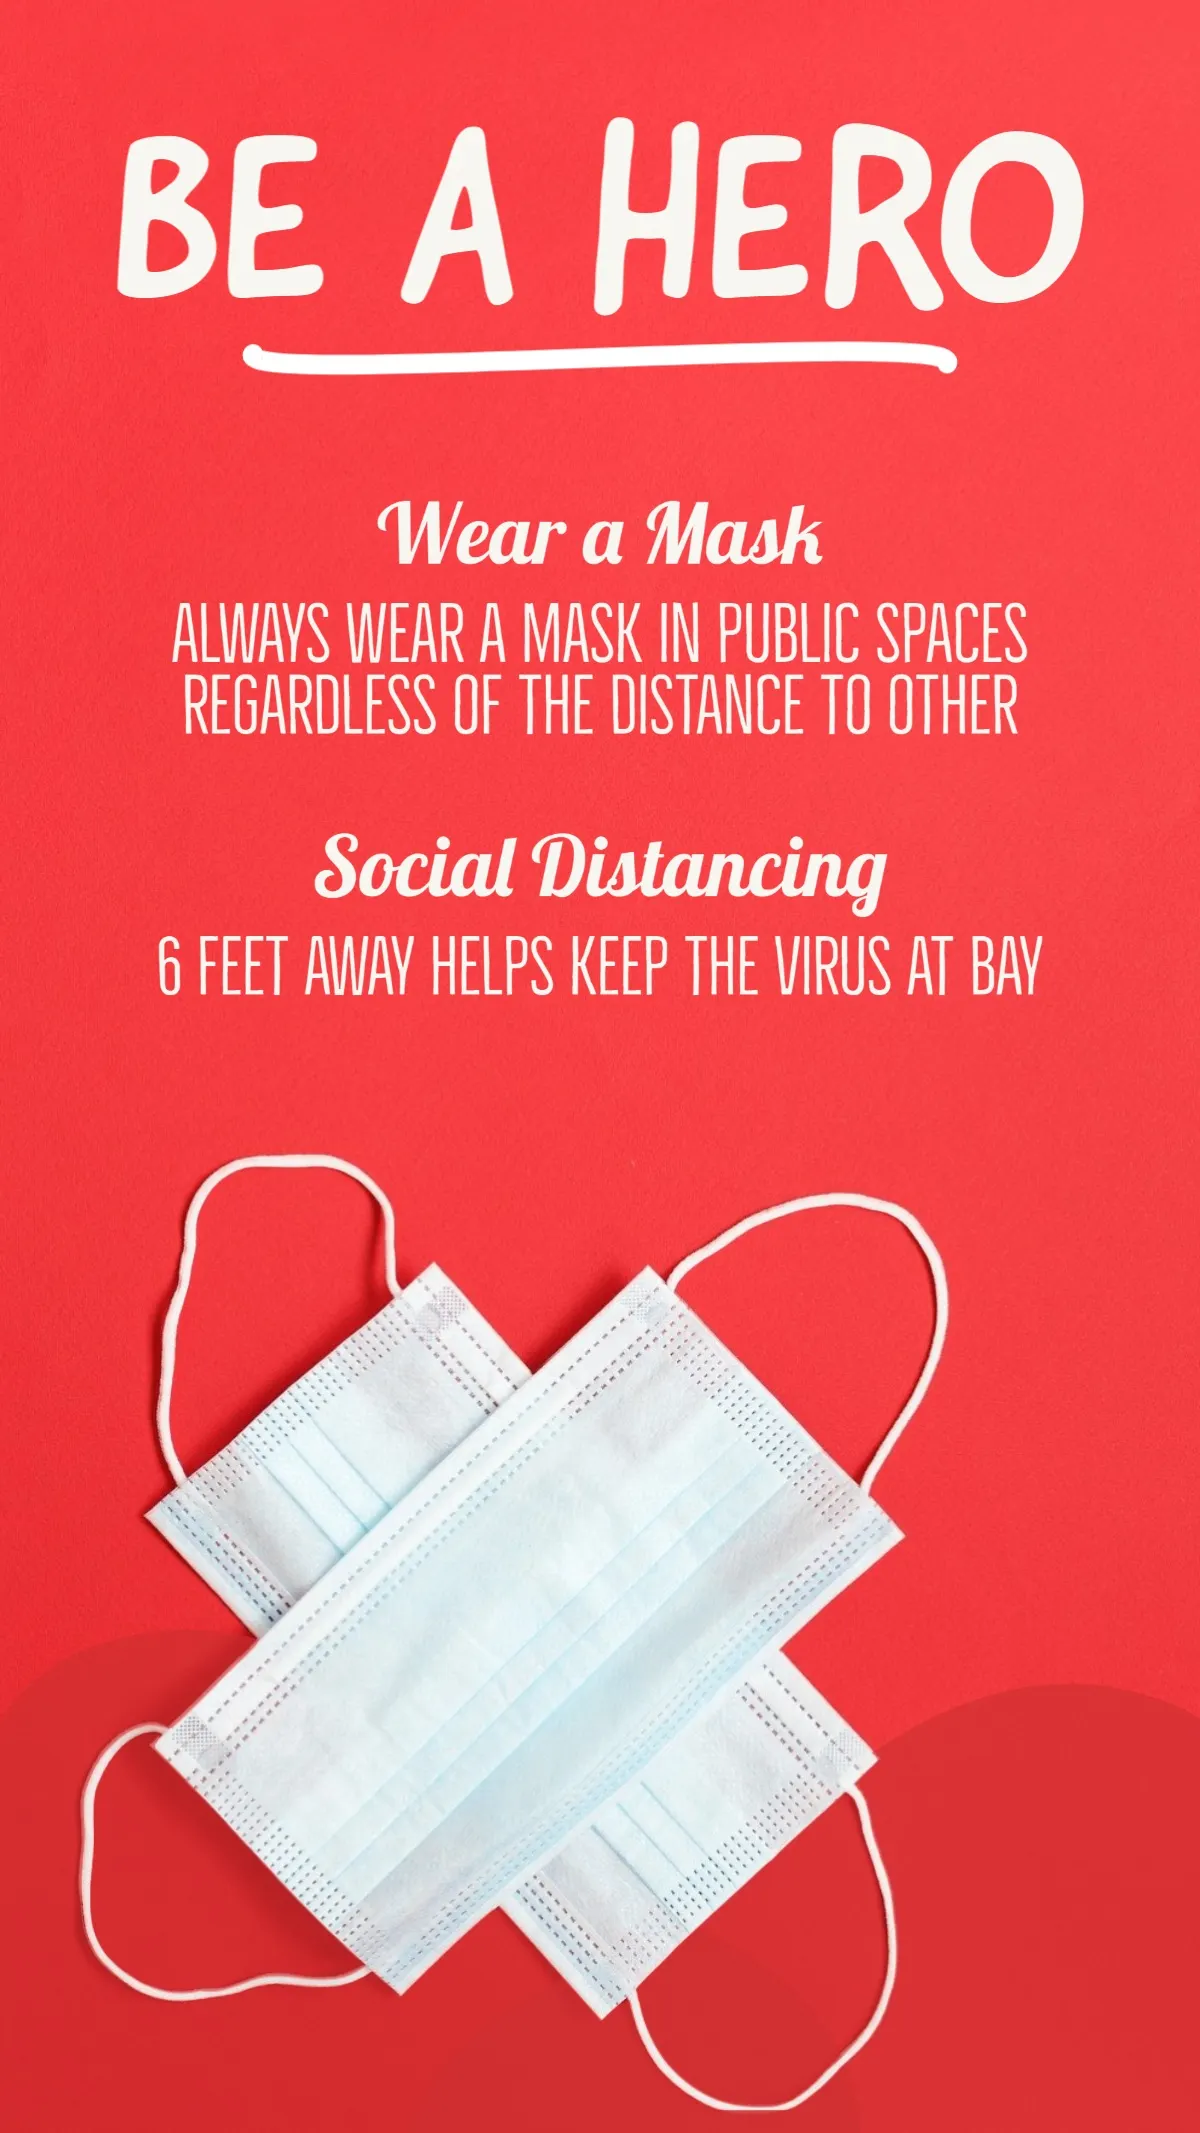 Red Be A Hero Covid Mask Infographic IG Story